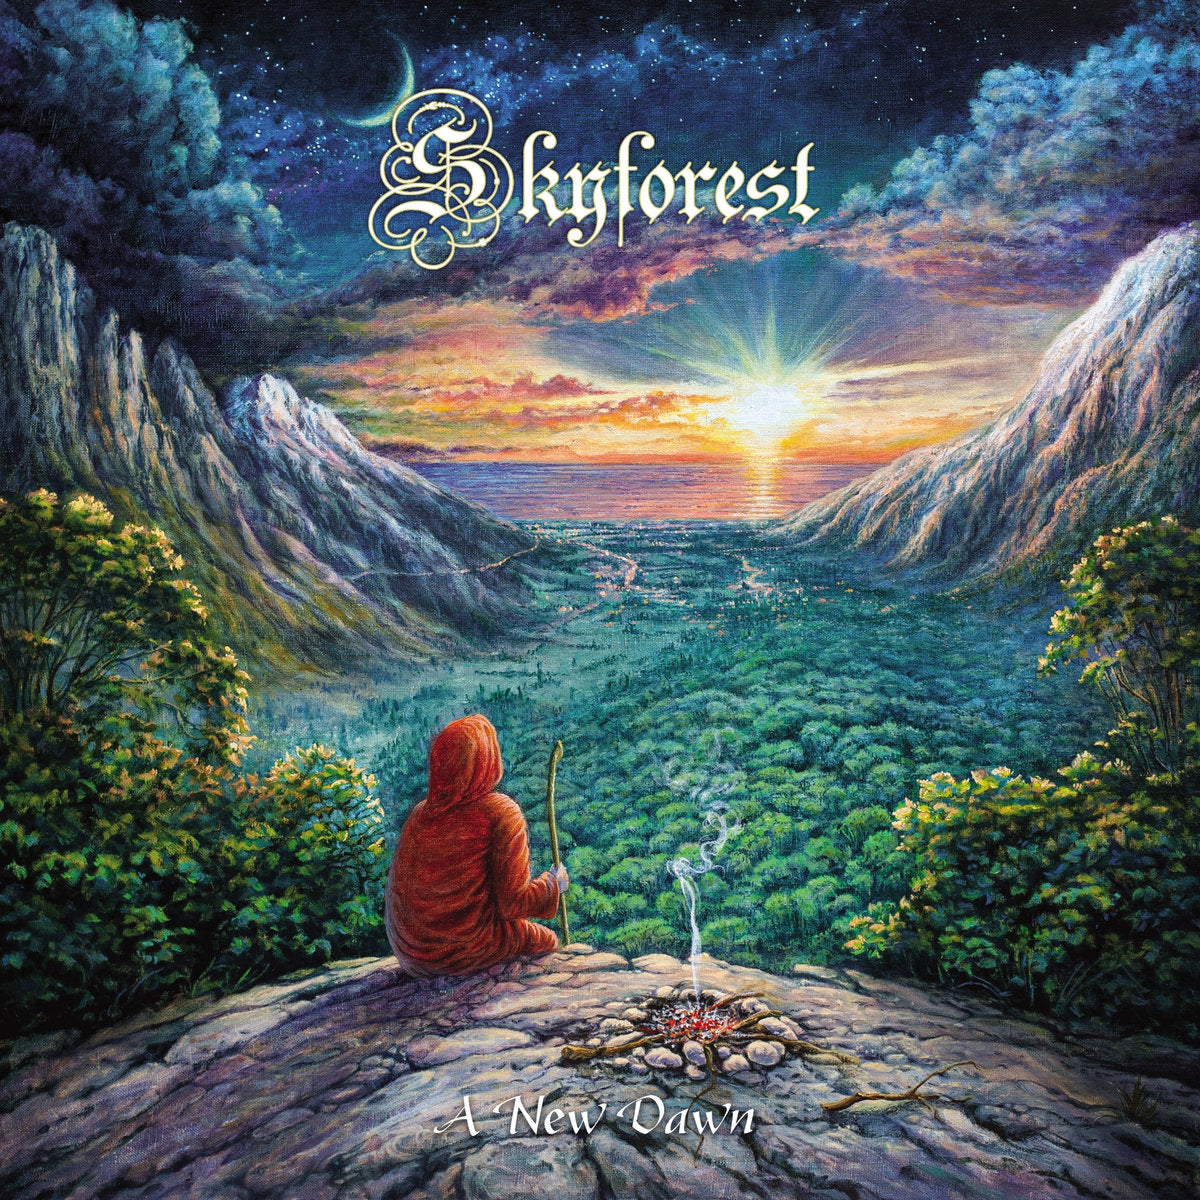 [SOLD OUT] SKYFOREST "A New Dawn" CD